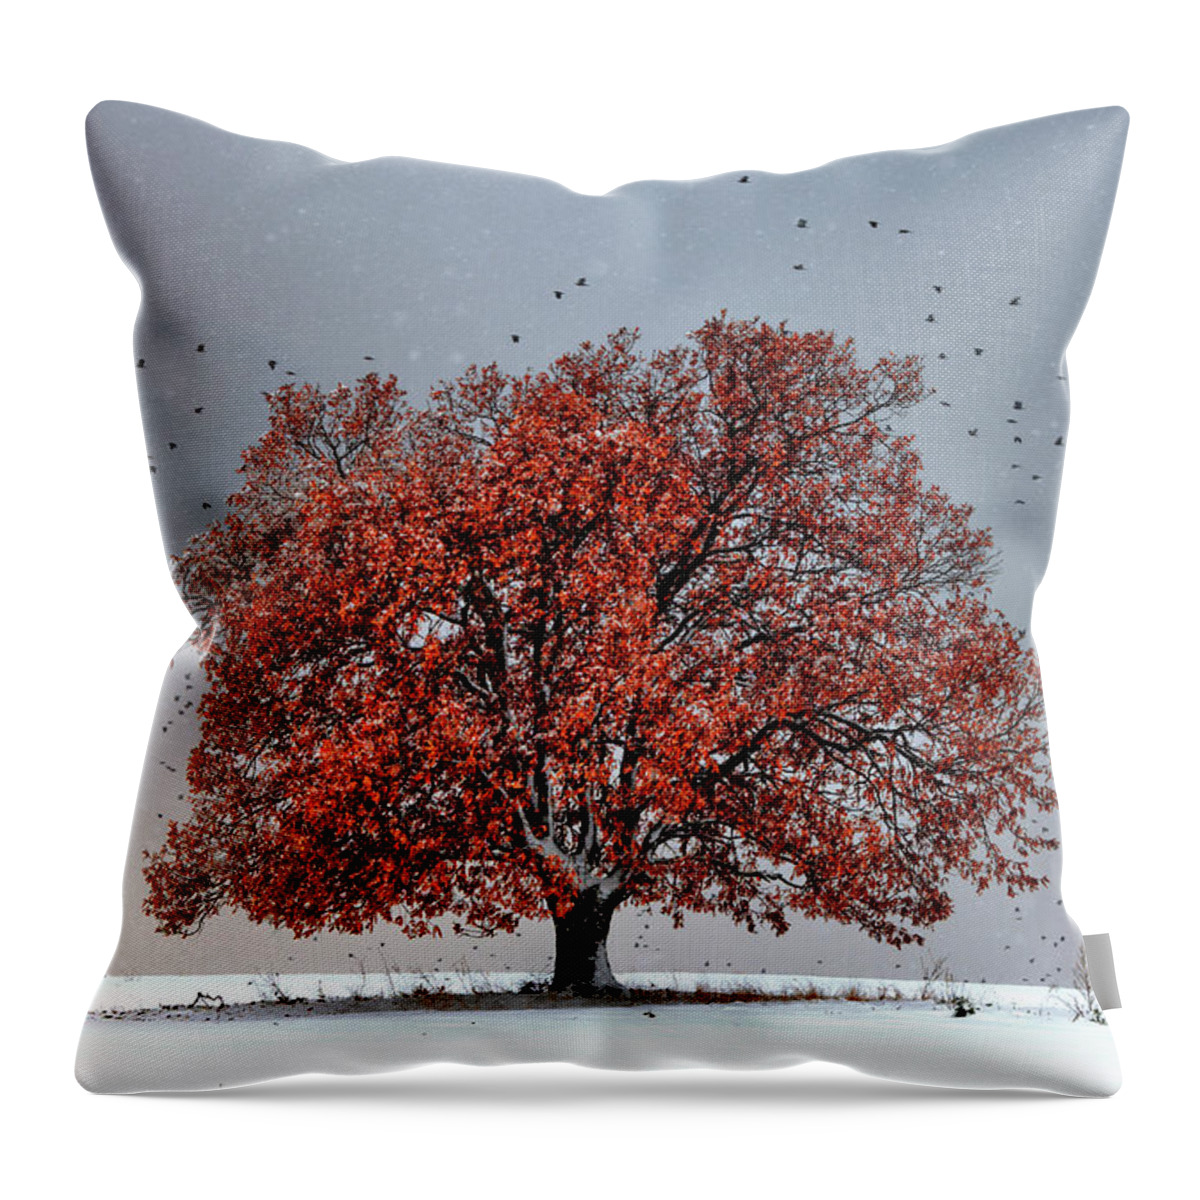 Bulgaria Throw Pillow featuring the photograph Tree Of Life by Evgeni Dinev